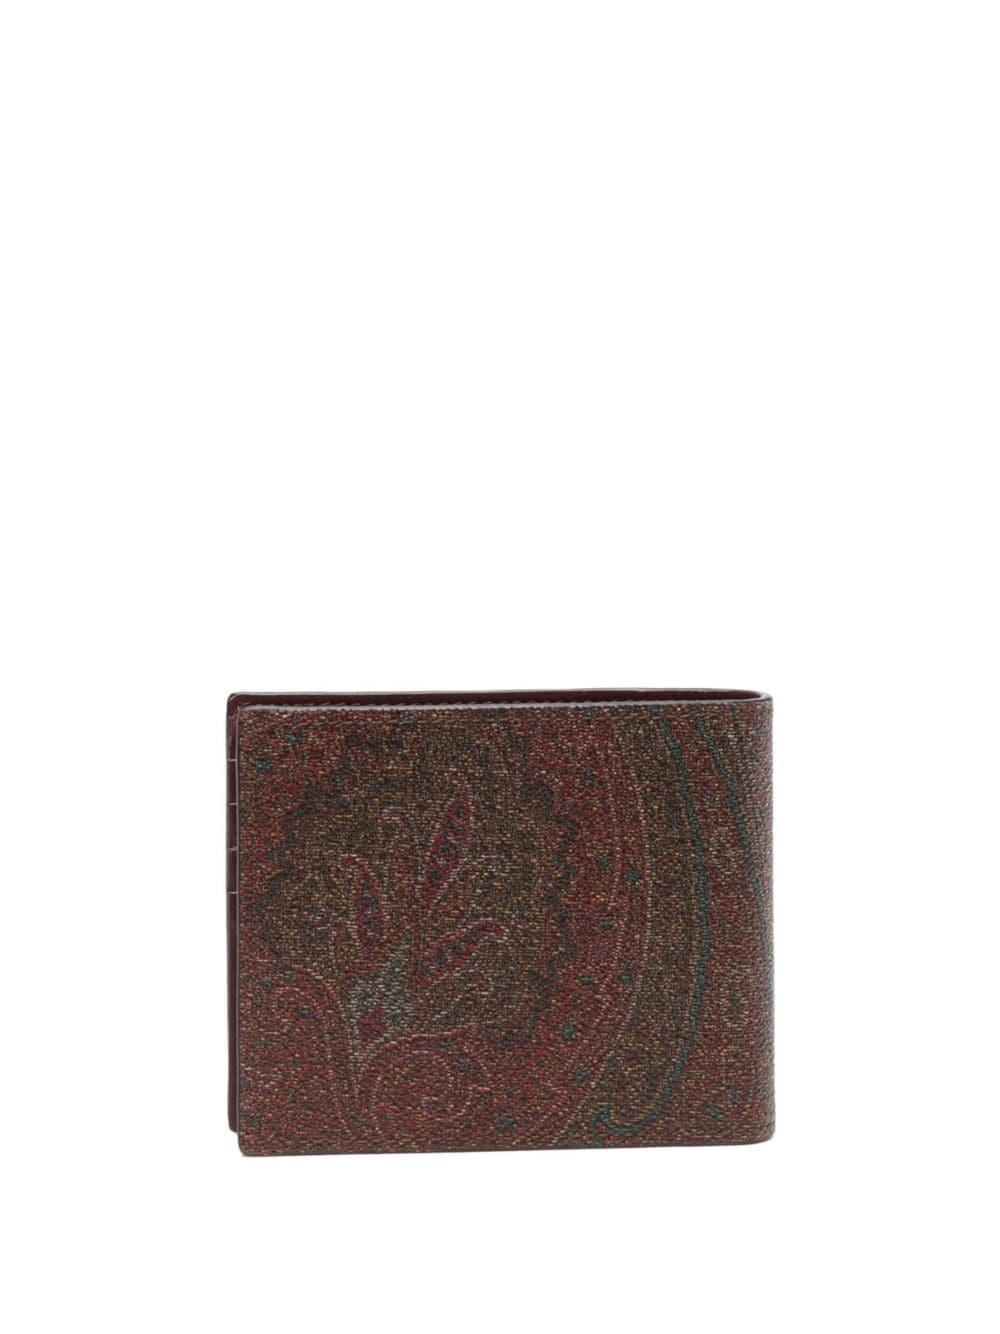 logo-embroidered leather wallet - 2